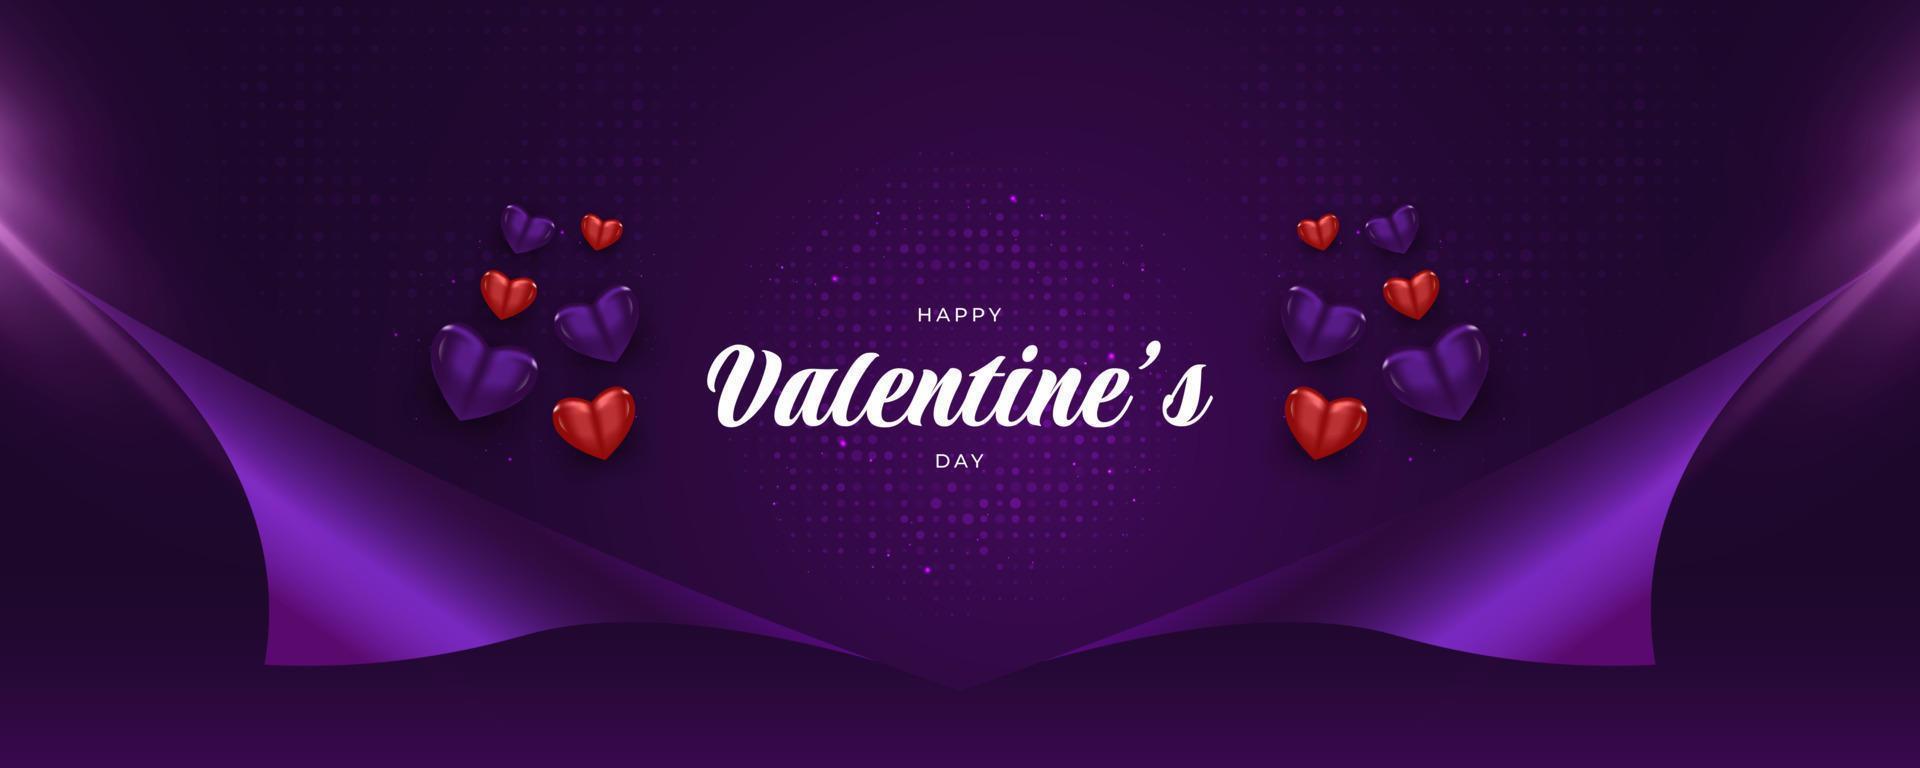 Valentines Day Banner with Cute Heart Illustration Isolated on Purple Background and Wrapping Paper Concept. Valentine's Day Decoration Elements vector